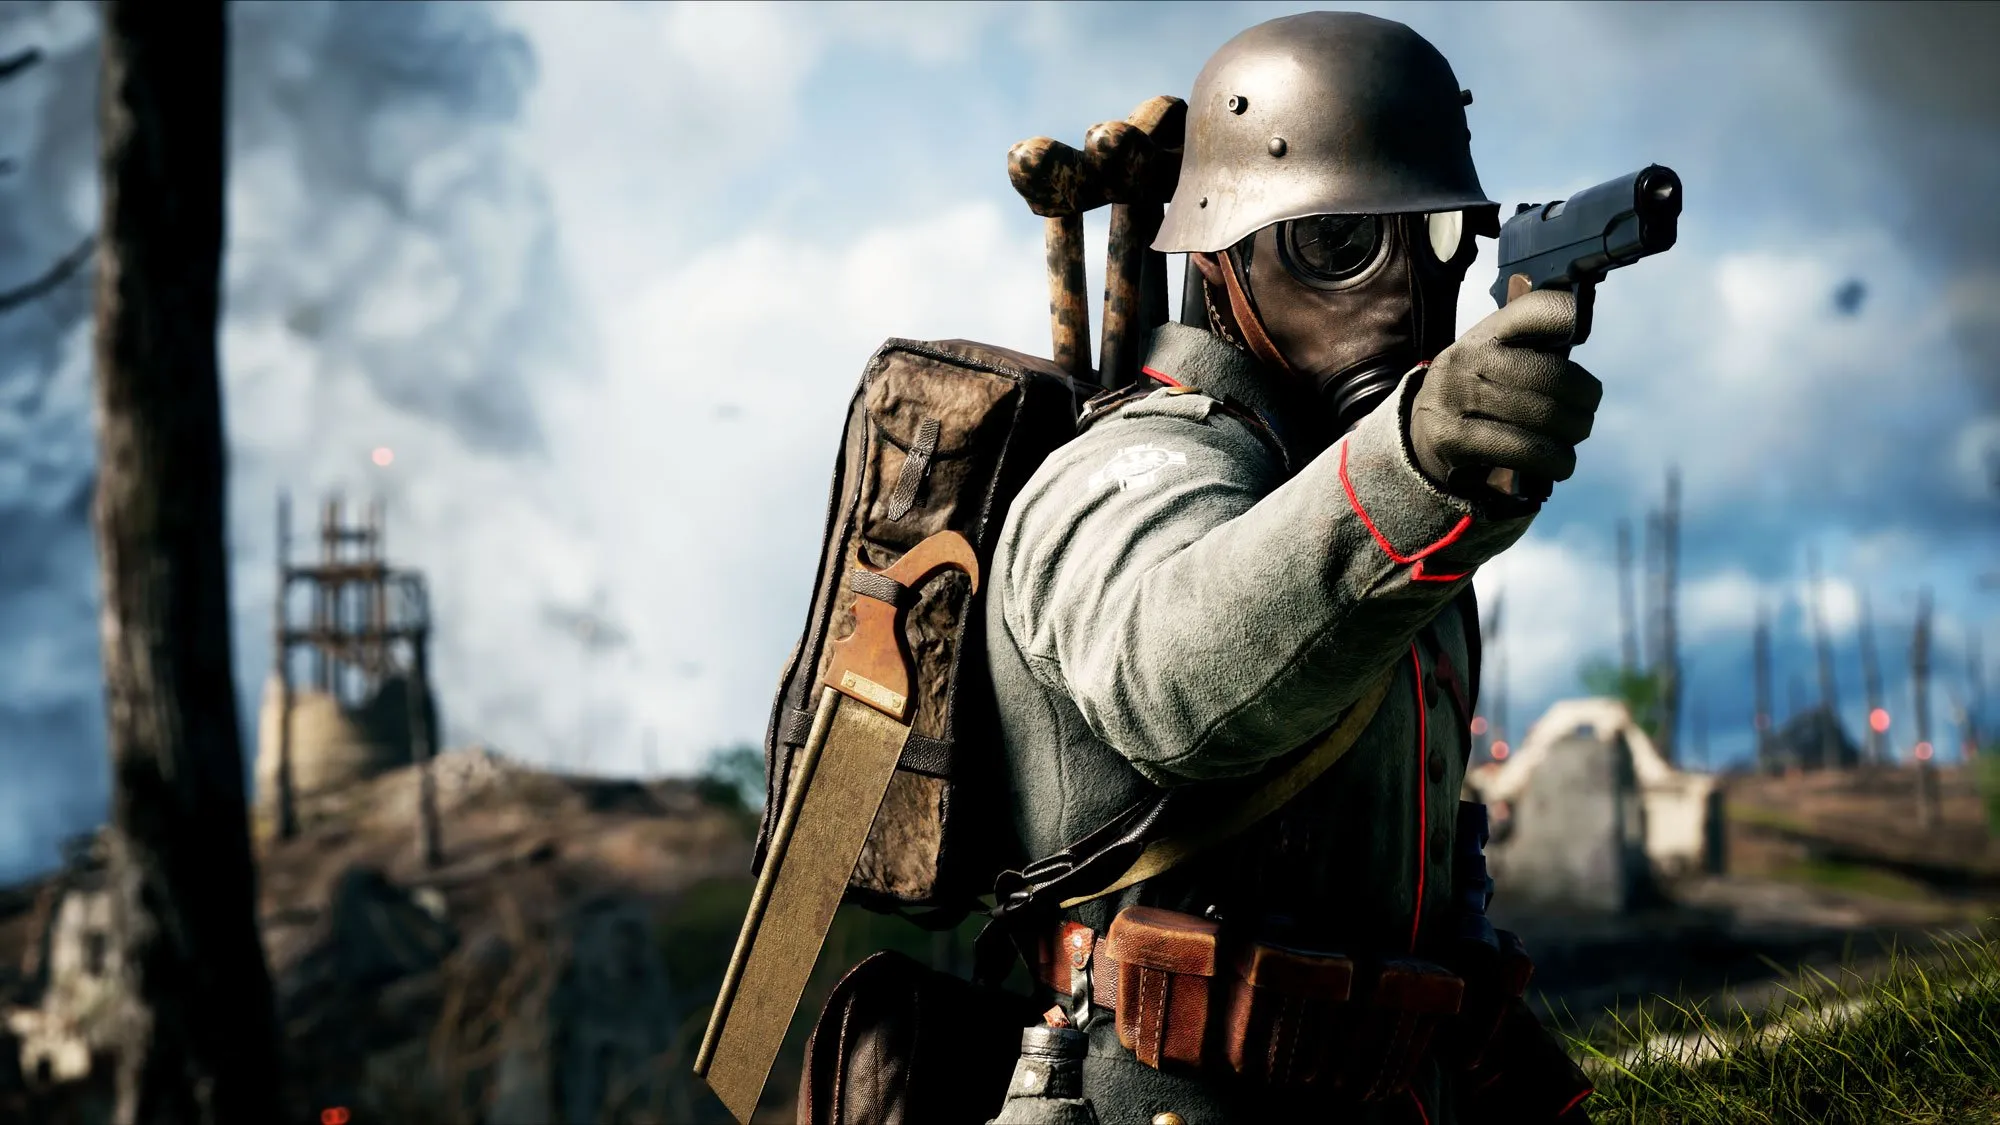 spredning Såkaldte regnskyl Operation Campaigns' return to Battlefield 1 and are now free for everyone  – Destructoid